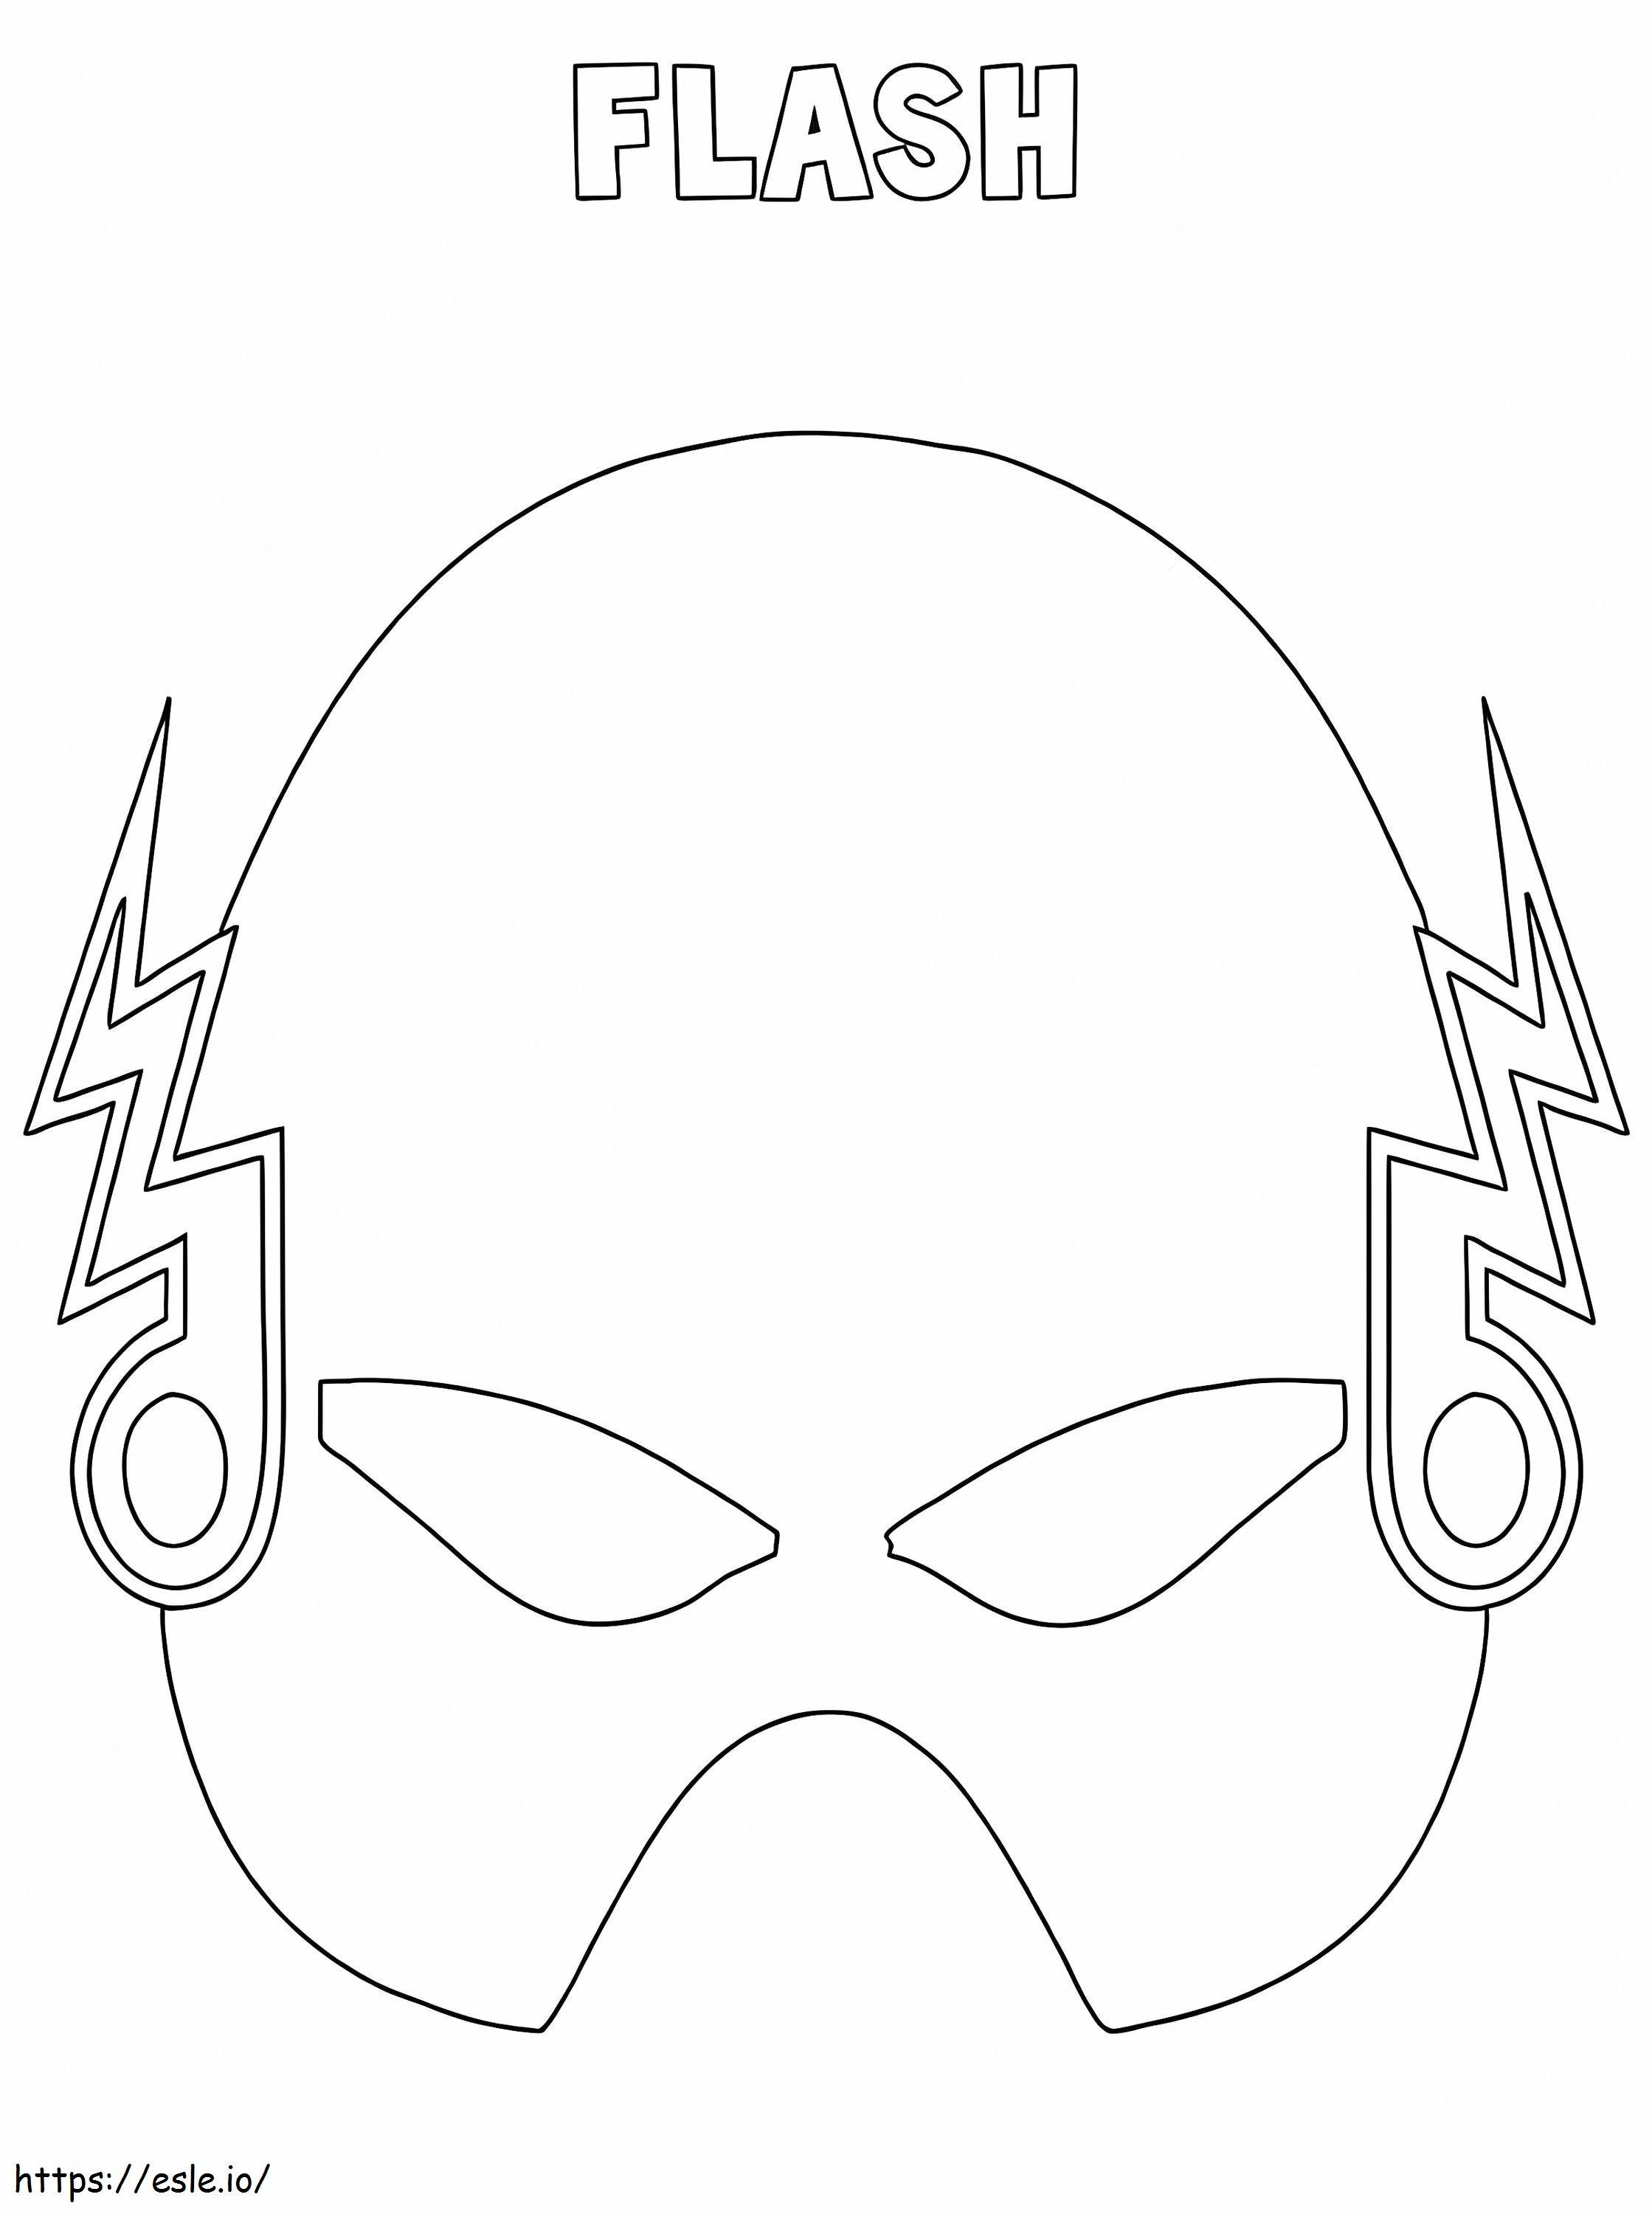 Flash Mask coloring page